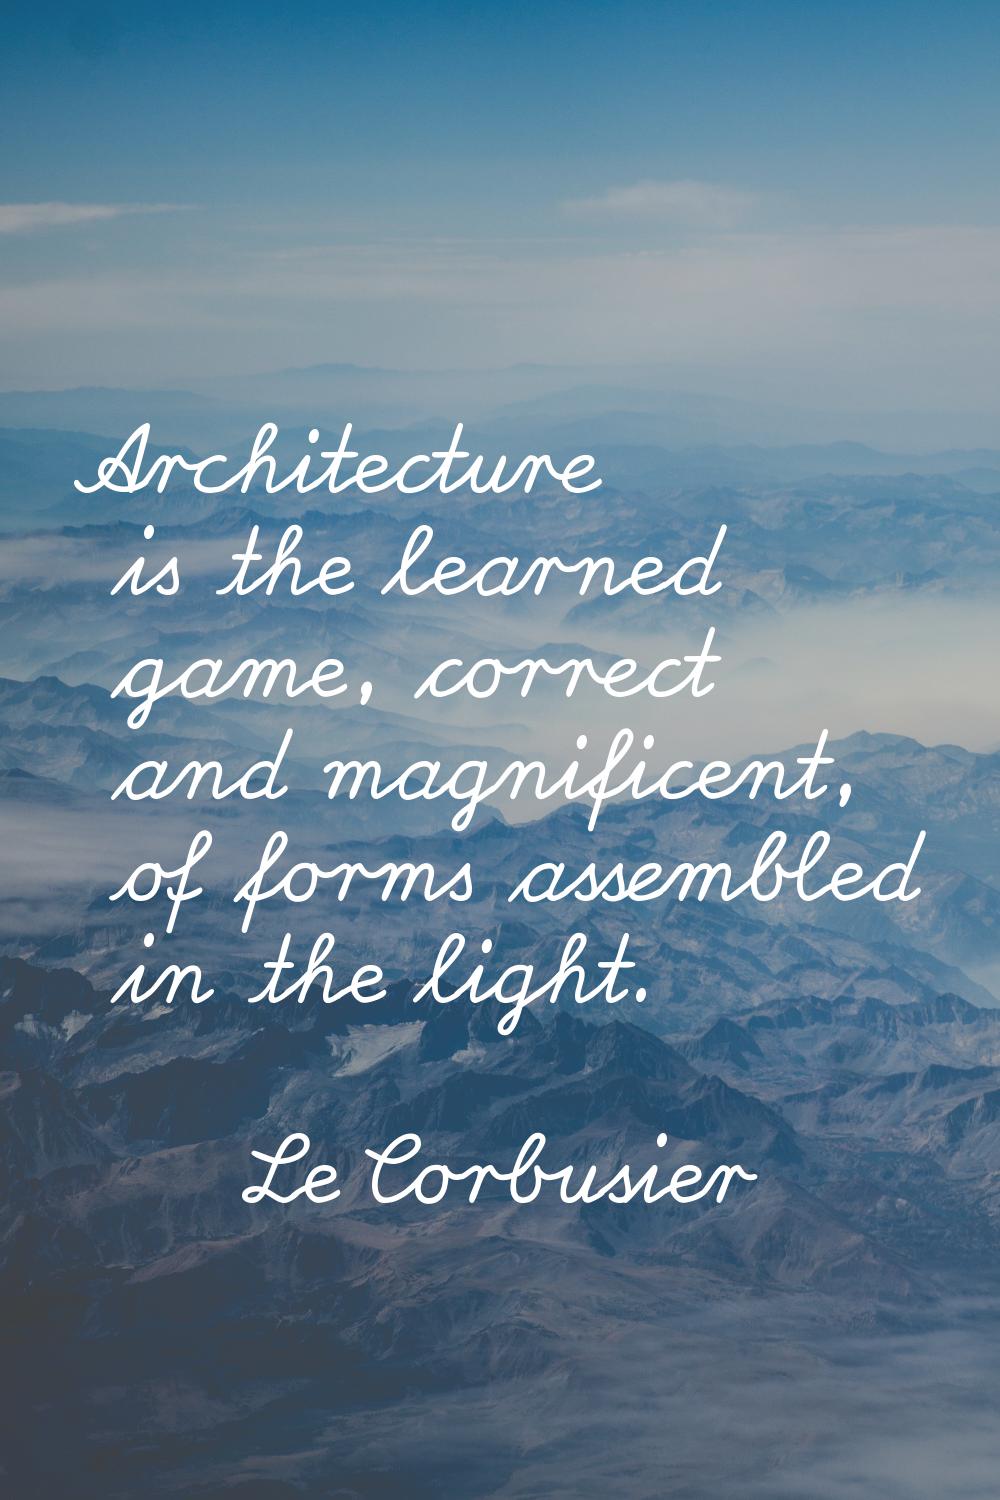 Architecture is the learned game, correct and magnificent, of forms assembled in the light.